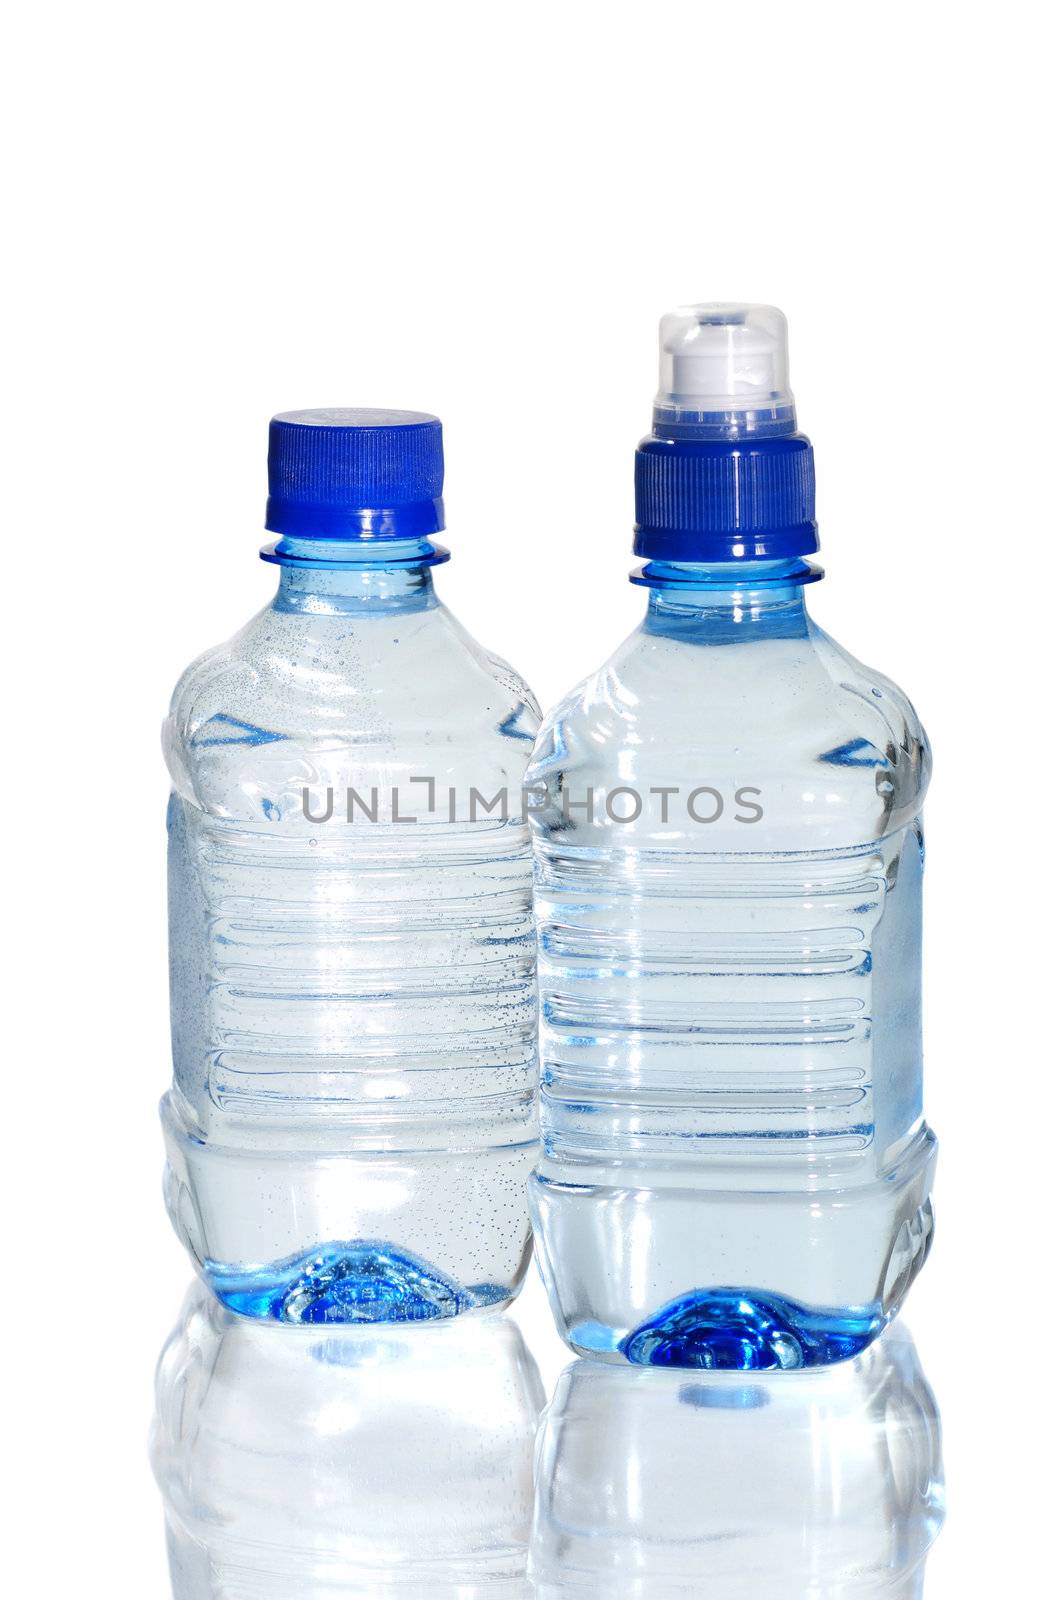 Bottle of water. Isolated on white, with reflection.